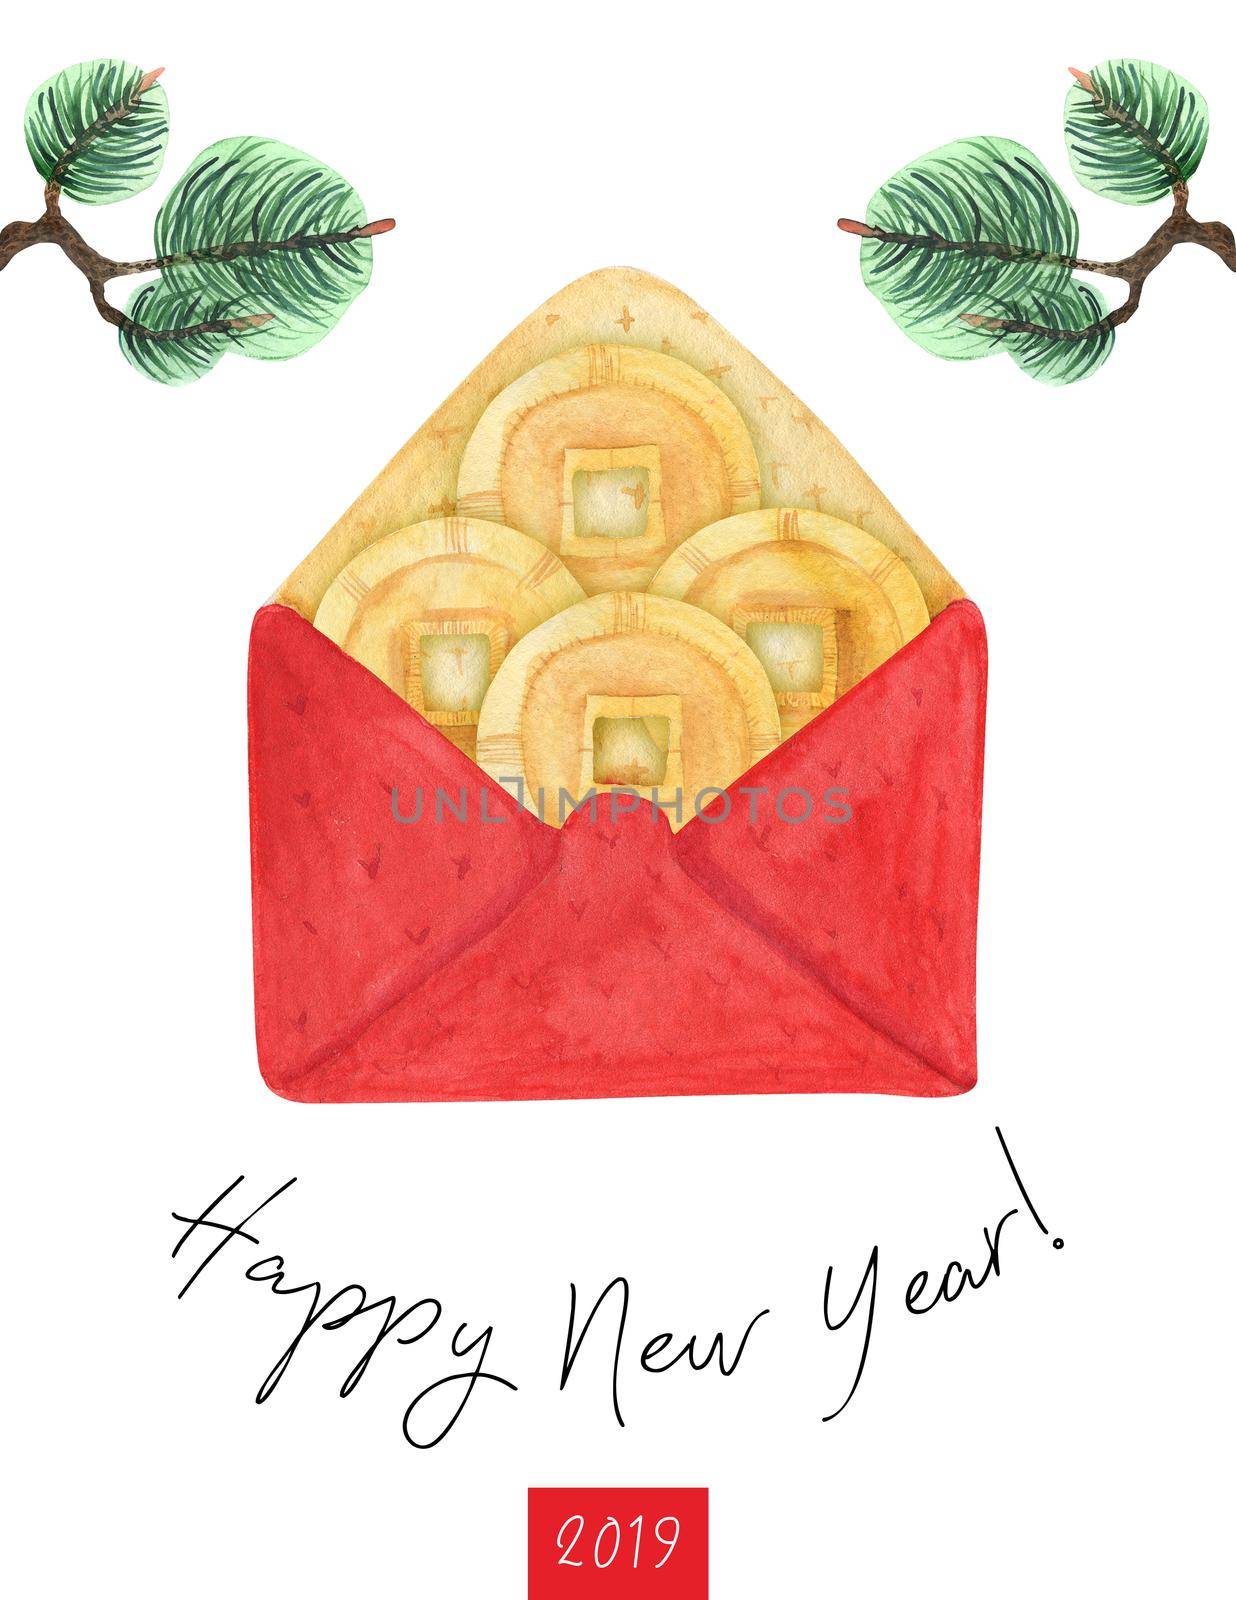 Happy New Year postcard with red packet and pine by Xeniasnowstorm